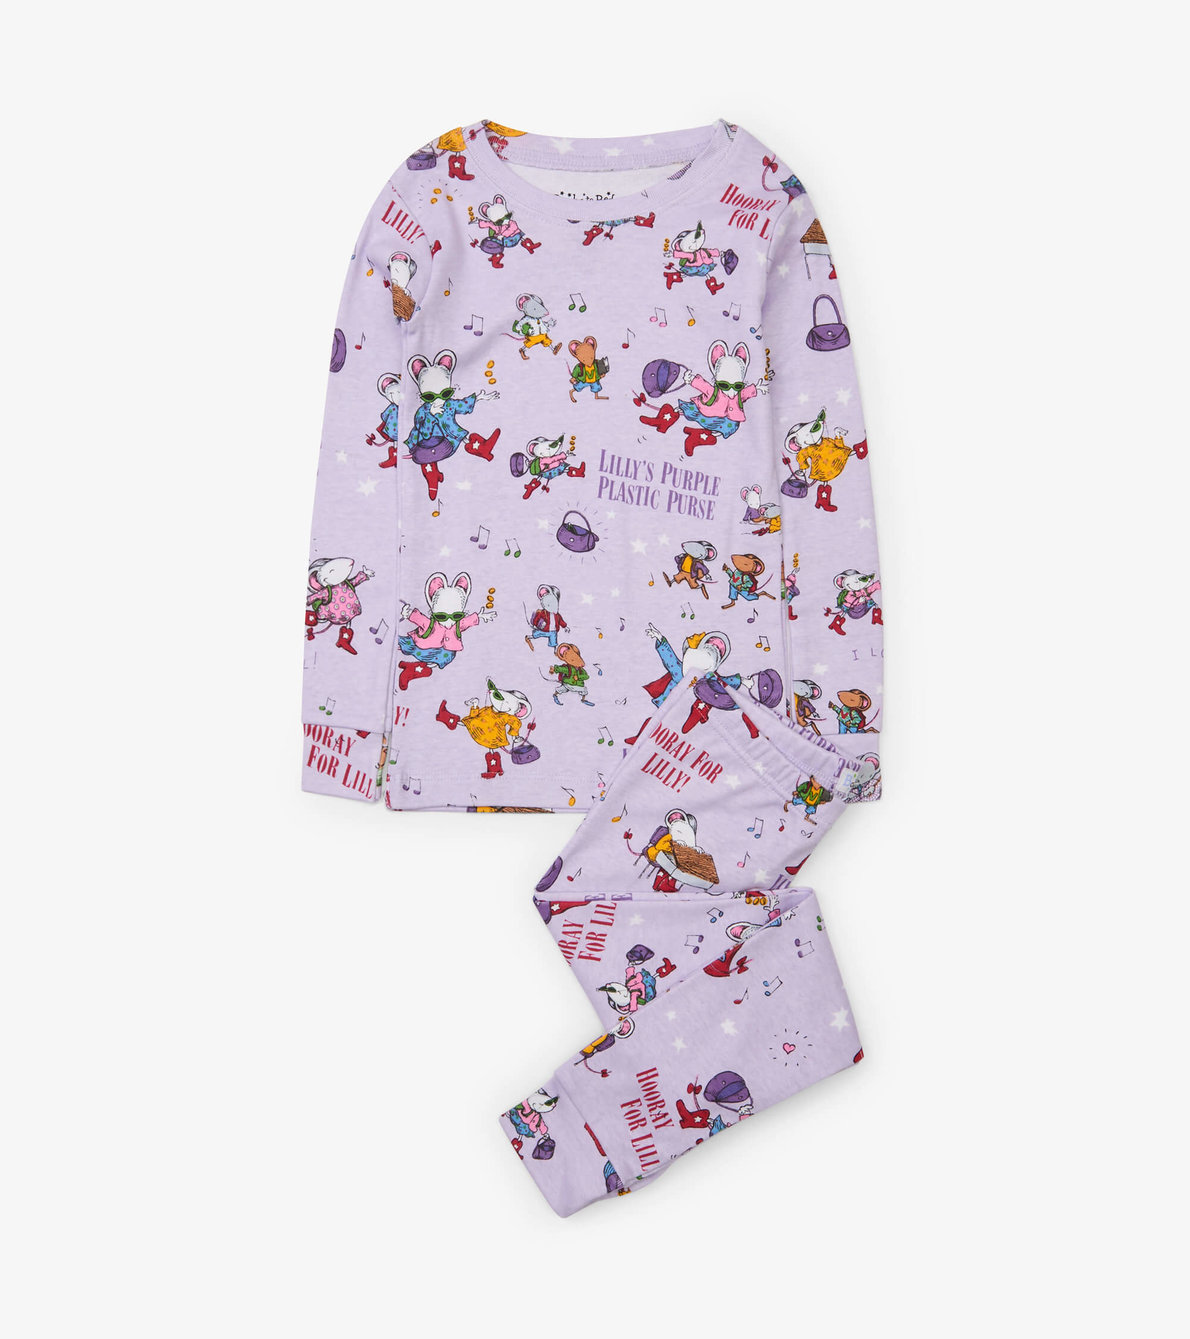 View larger image of Lilly's Purple Plastic Purse Pajama Set